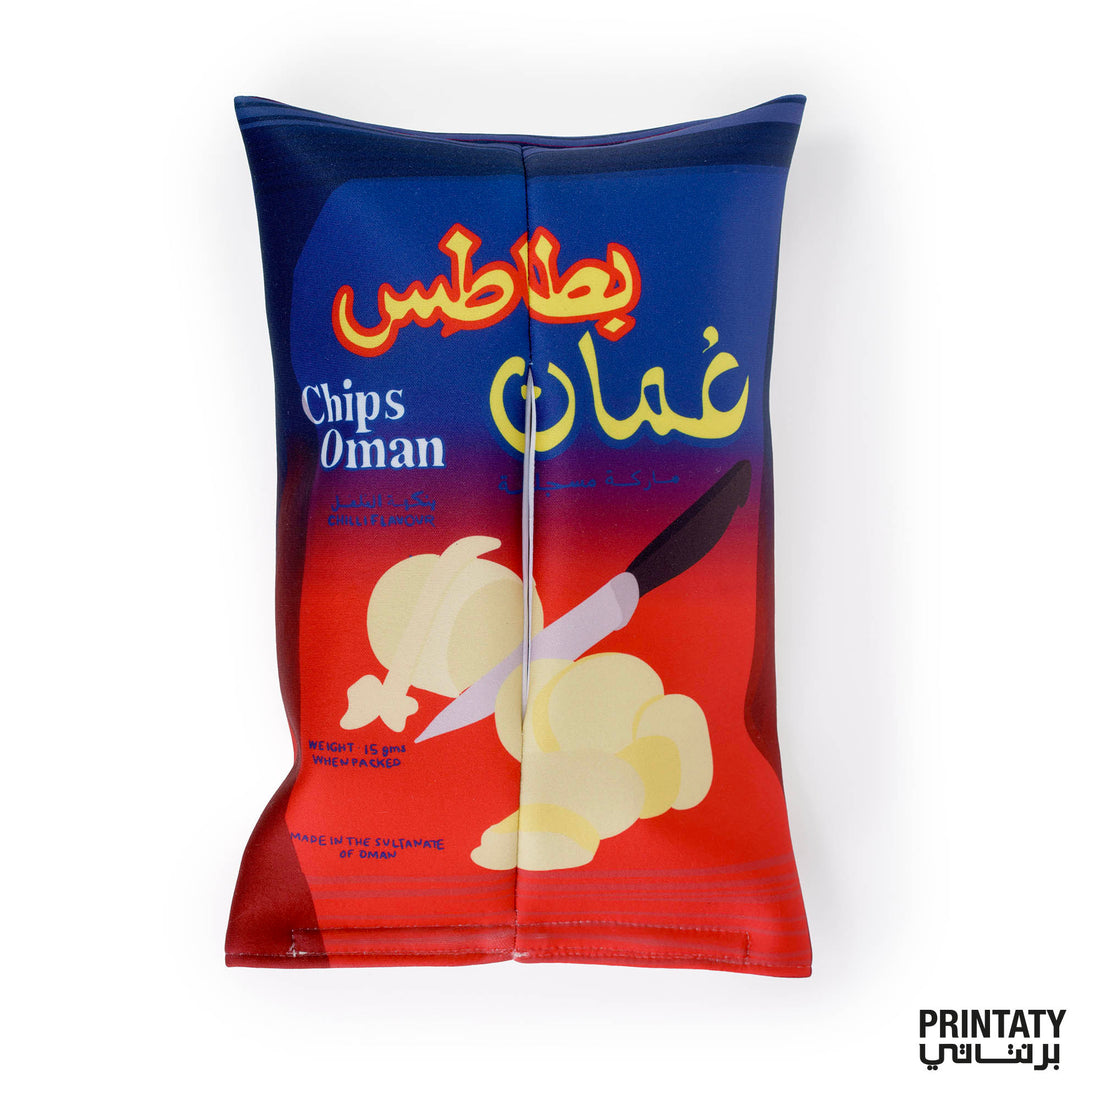 Tissue boxes cover : Oman Chips